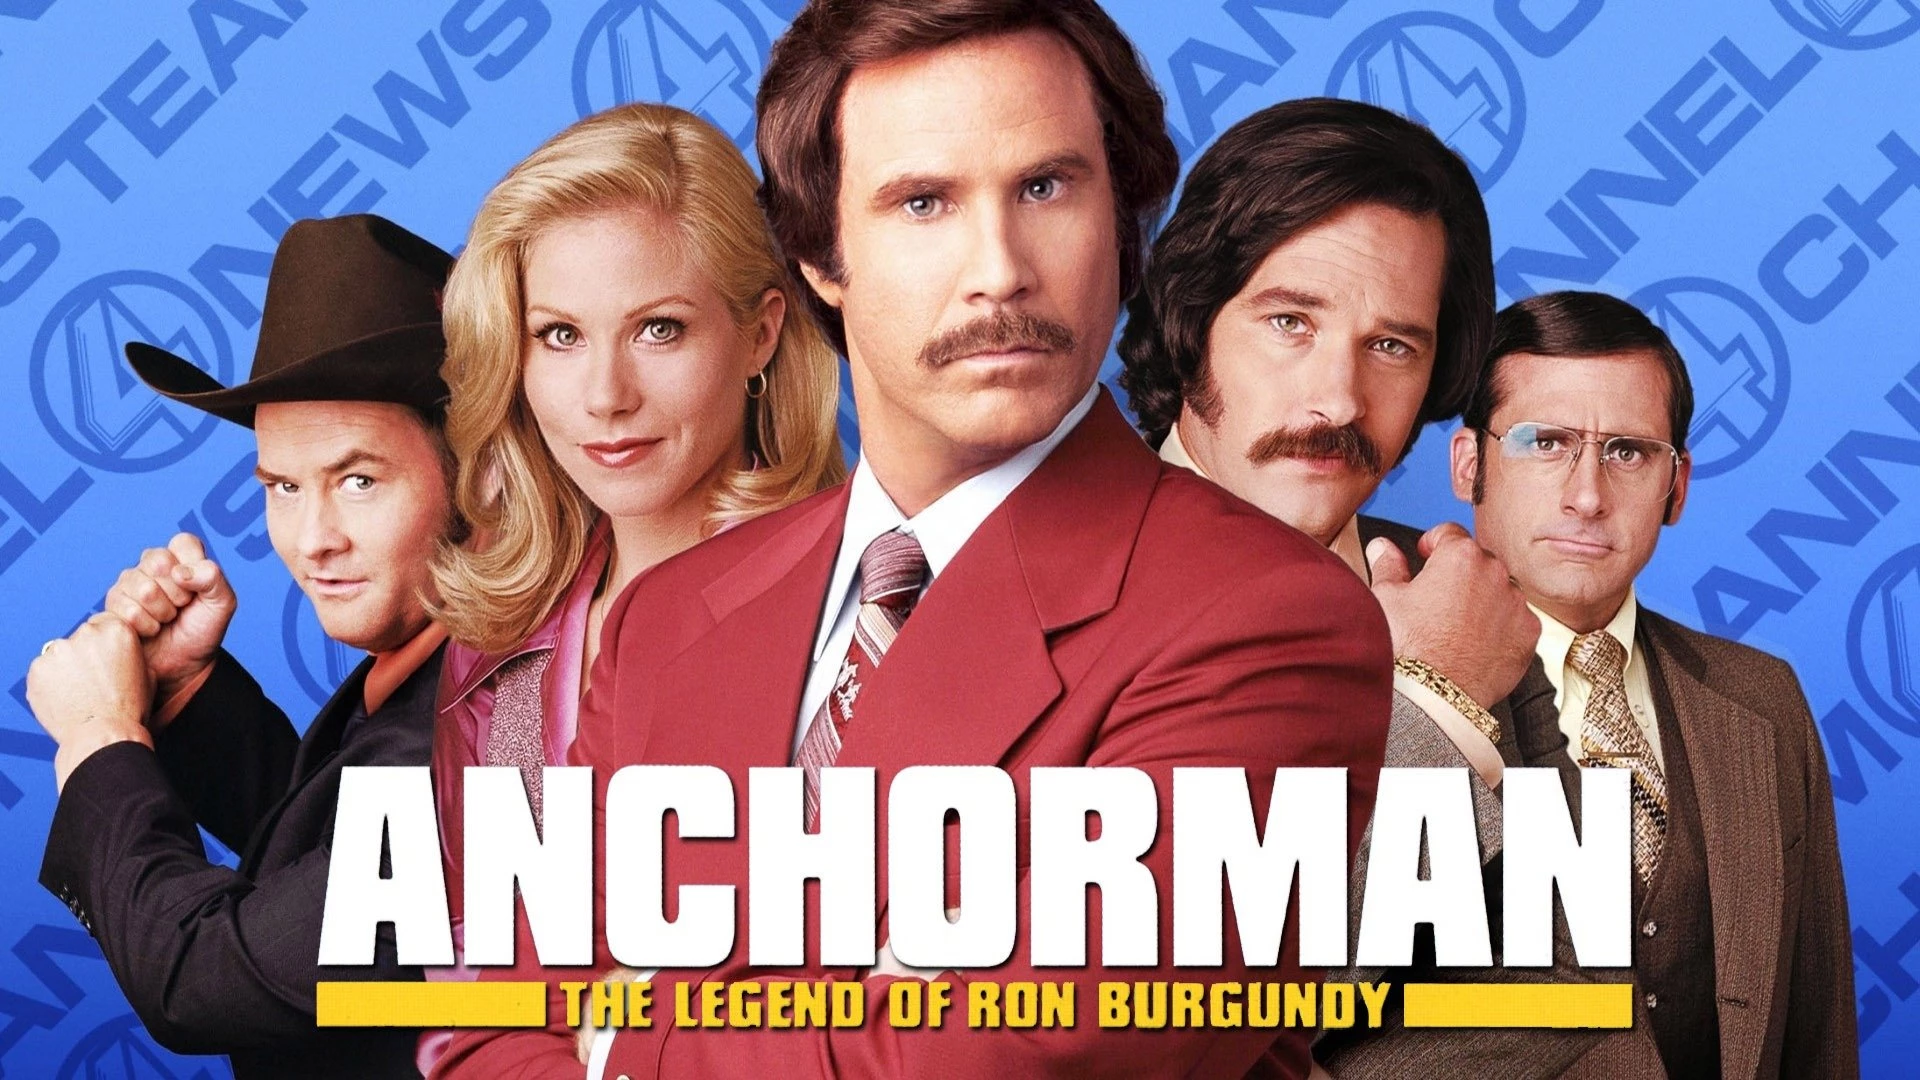 movies like grown ups - Anchorman: The Legend of Ron Burgundy" (2004)